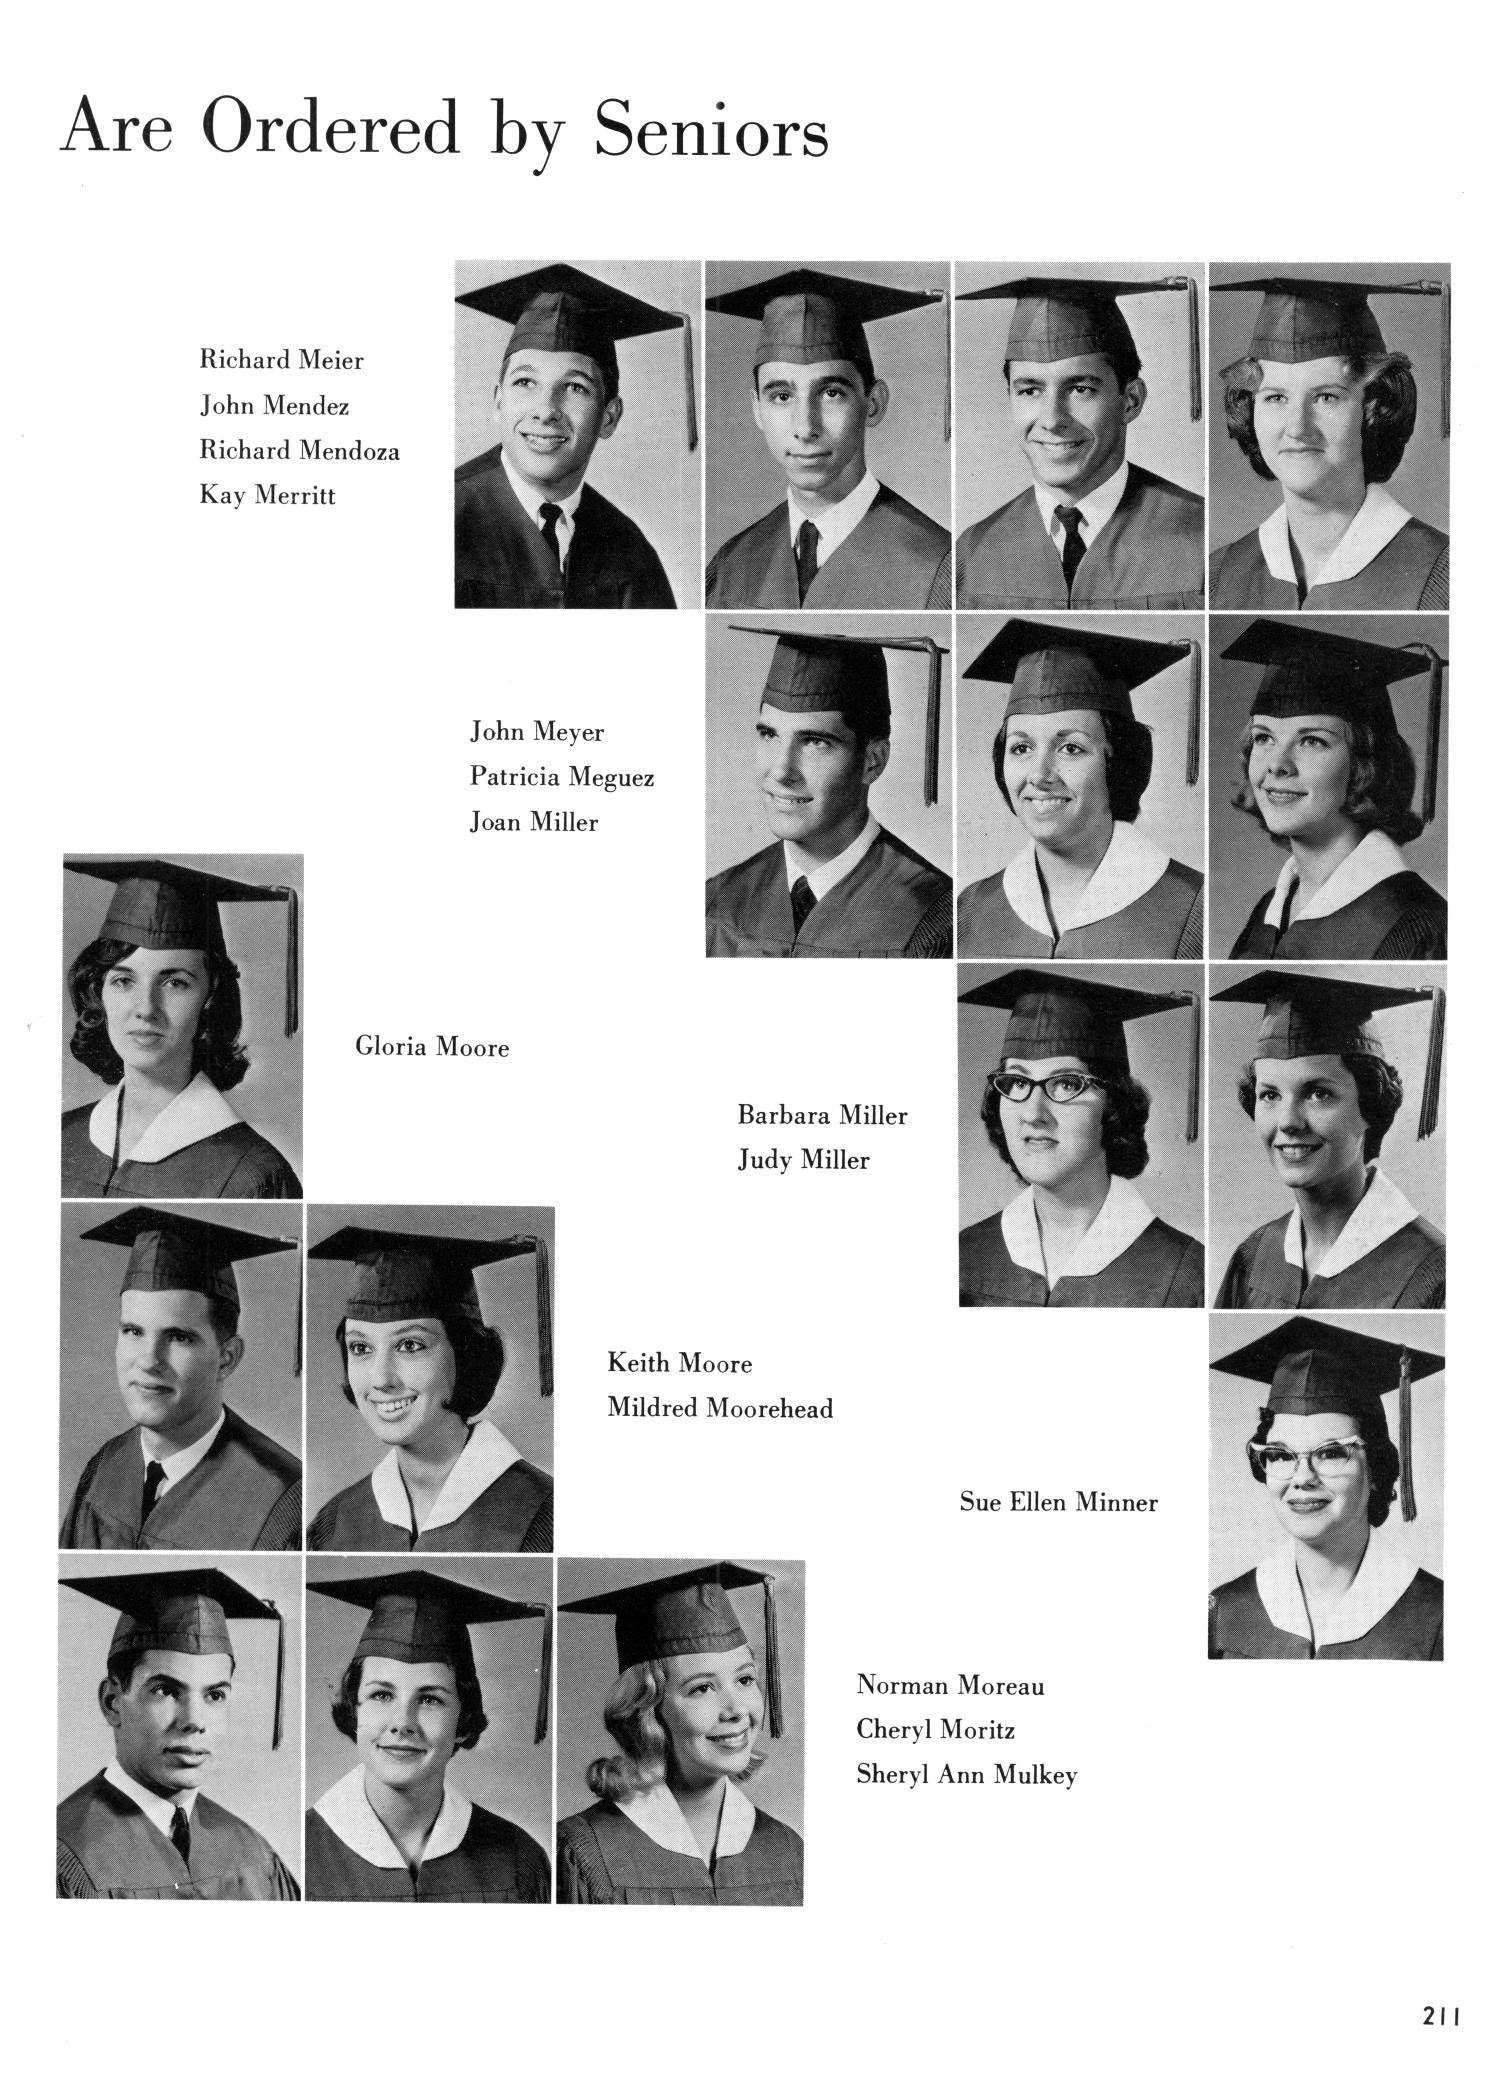 The Yellow Jacket, Yearbook of Thomas Jefferson High School, 1964
                                                
                                                    211
                                                